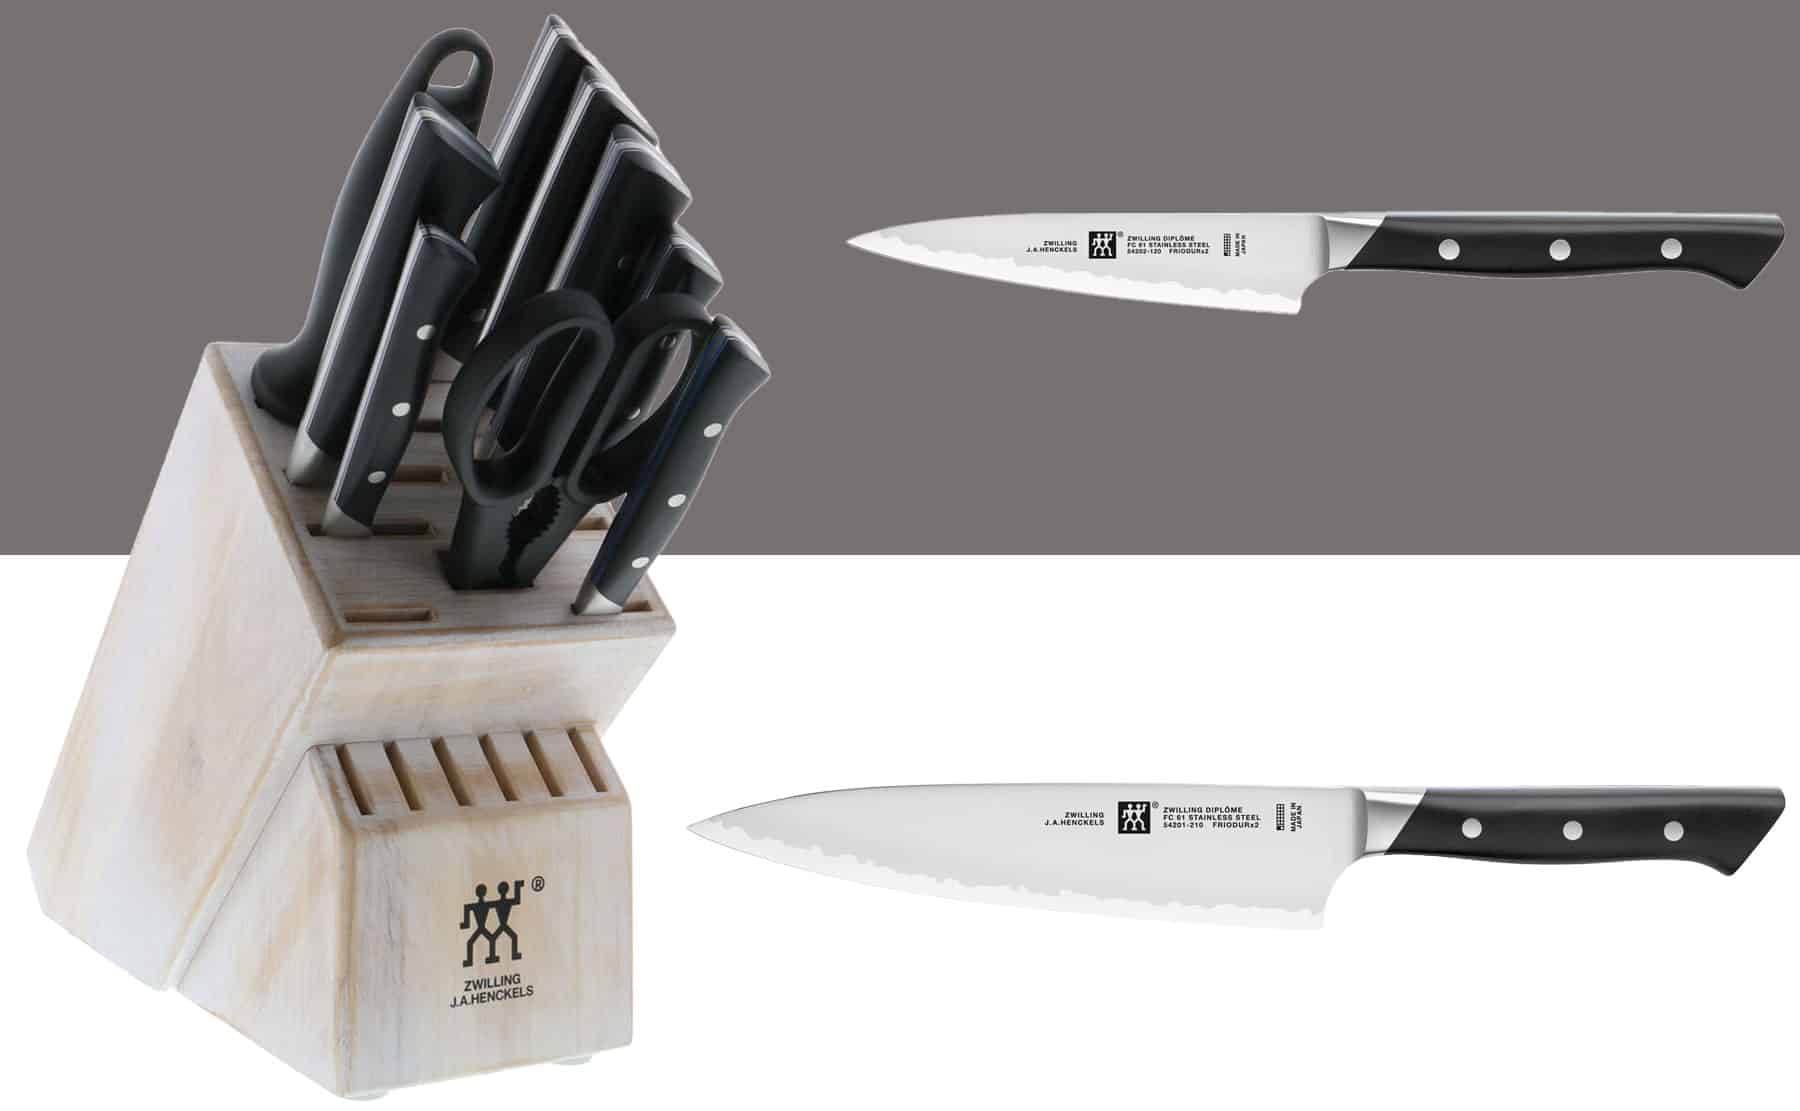 This graphic shows a Zwilling Diplome knife set and two knives to give the reader a good overview of the looks and build quality of this knife series.